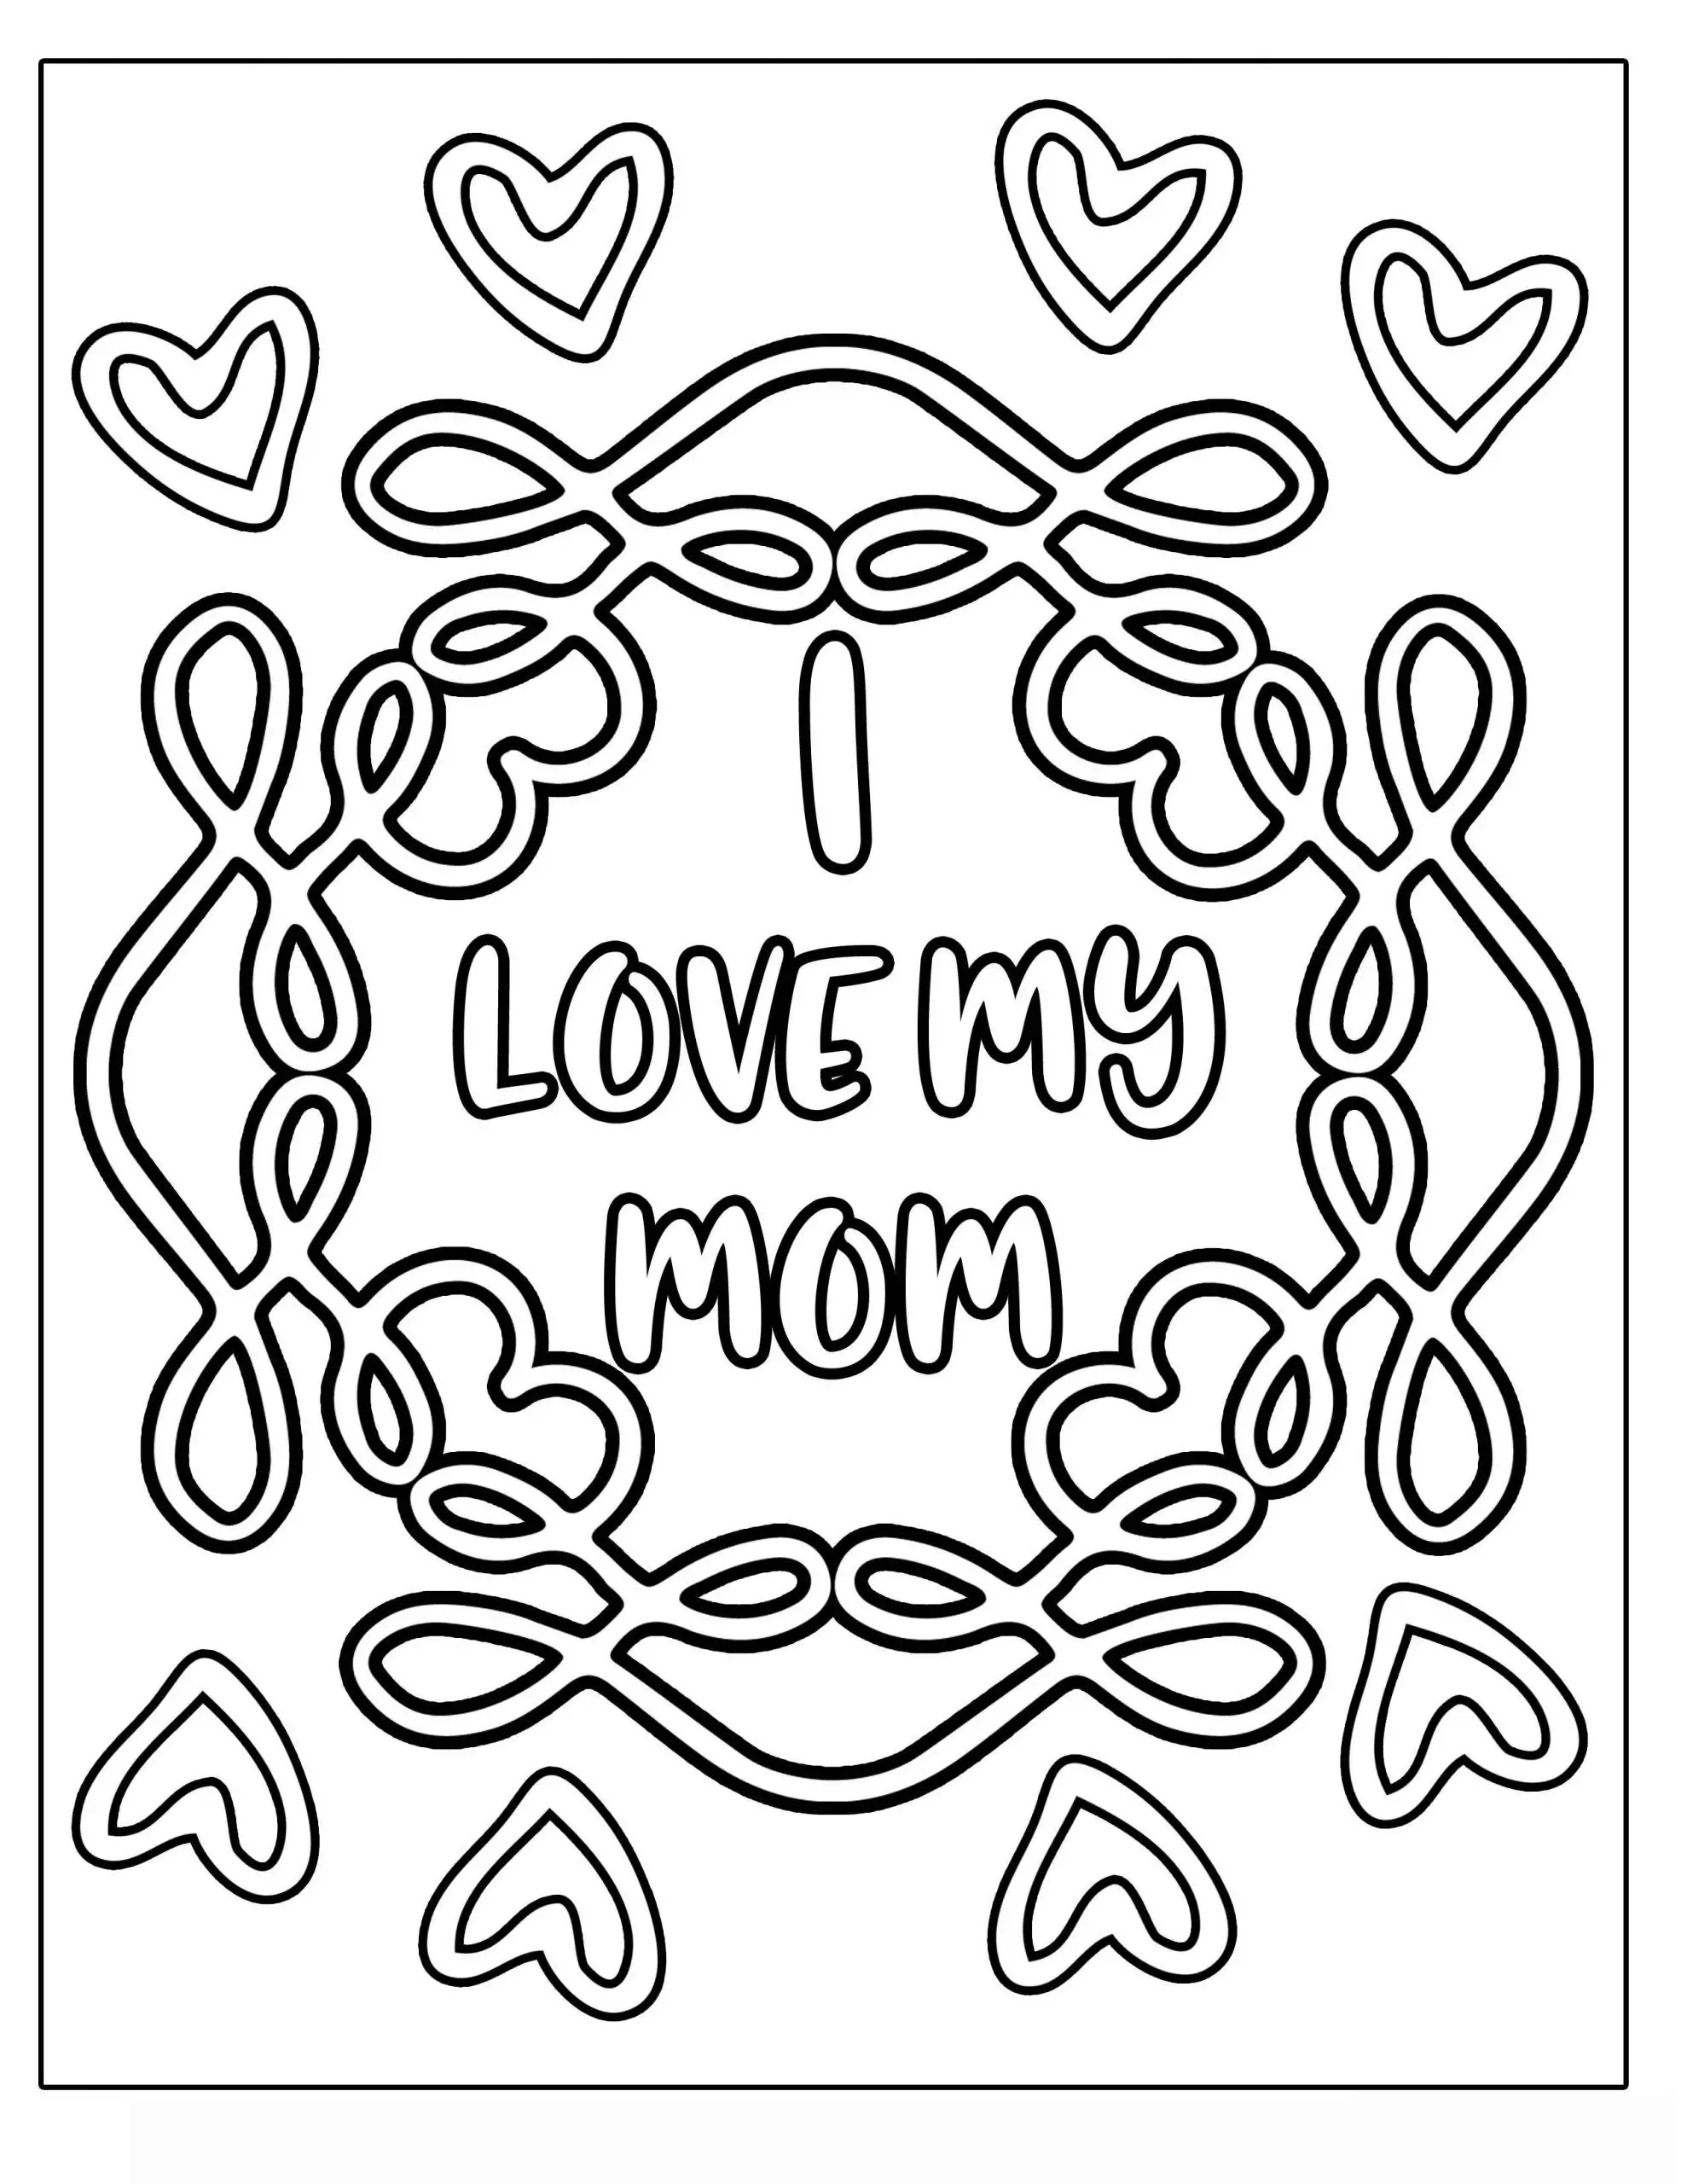 I LOVE MY MOM MOTHER'S DAY flower with vines and frills Clipart Coloring Pages for Kids Adults Art Activities Line Art